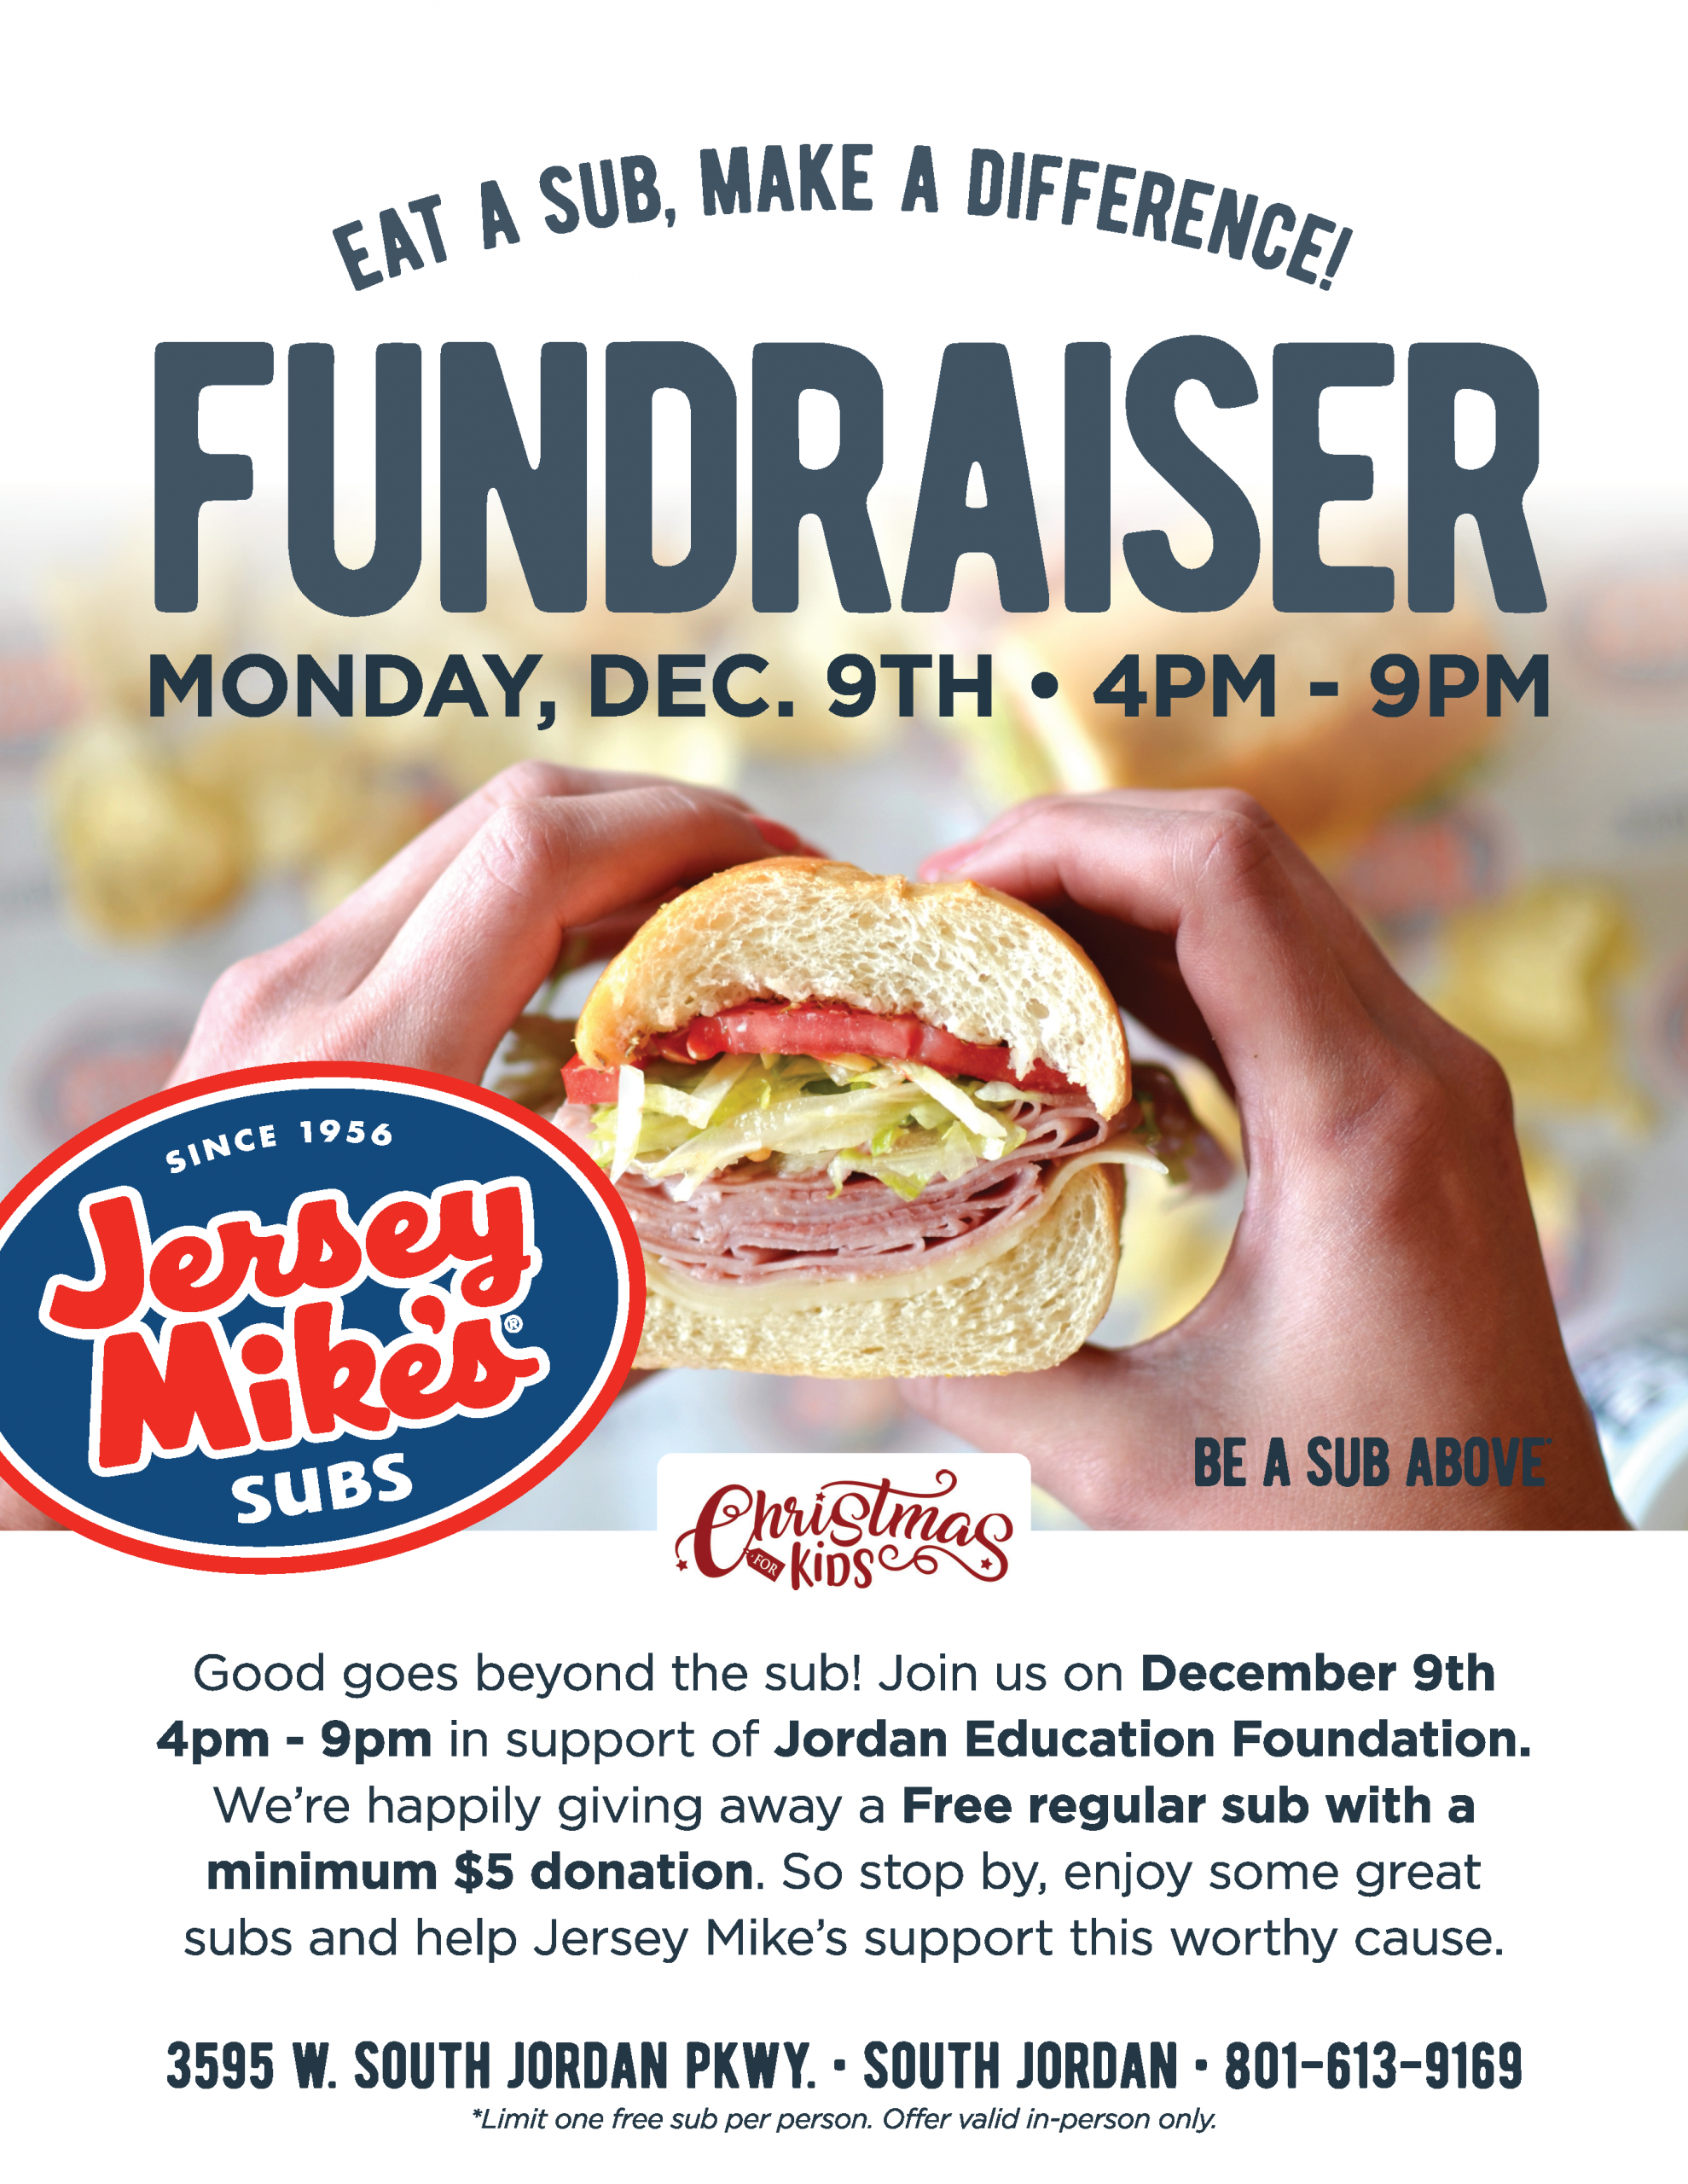 Foundation Fundraiser with Jersey Mike's